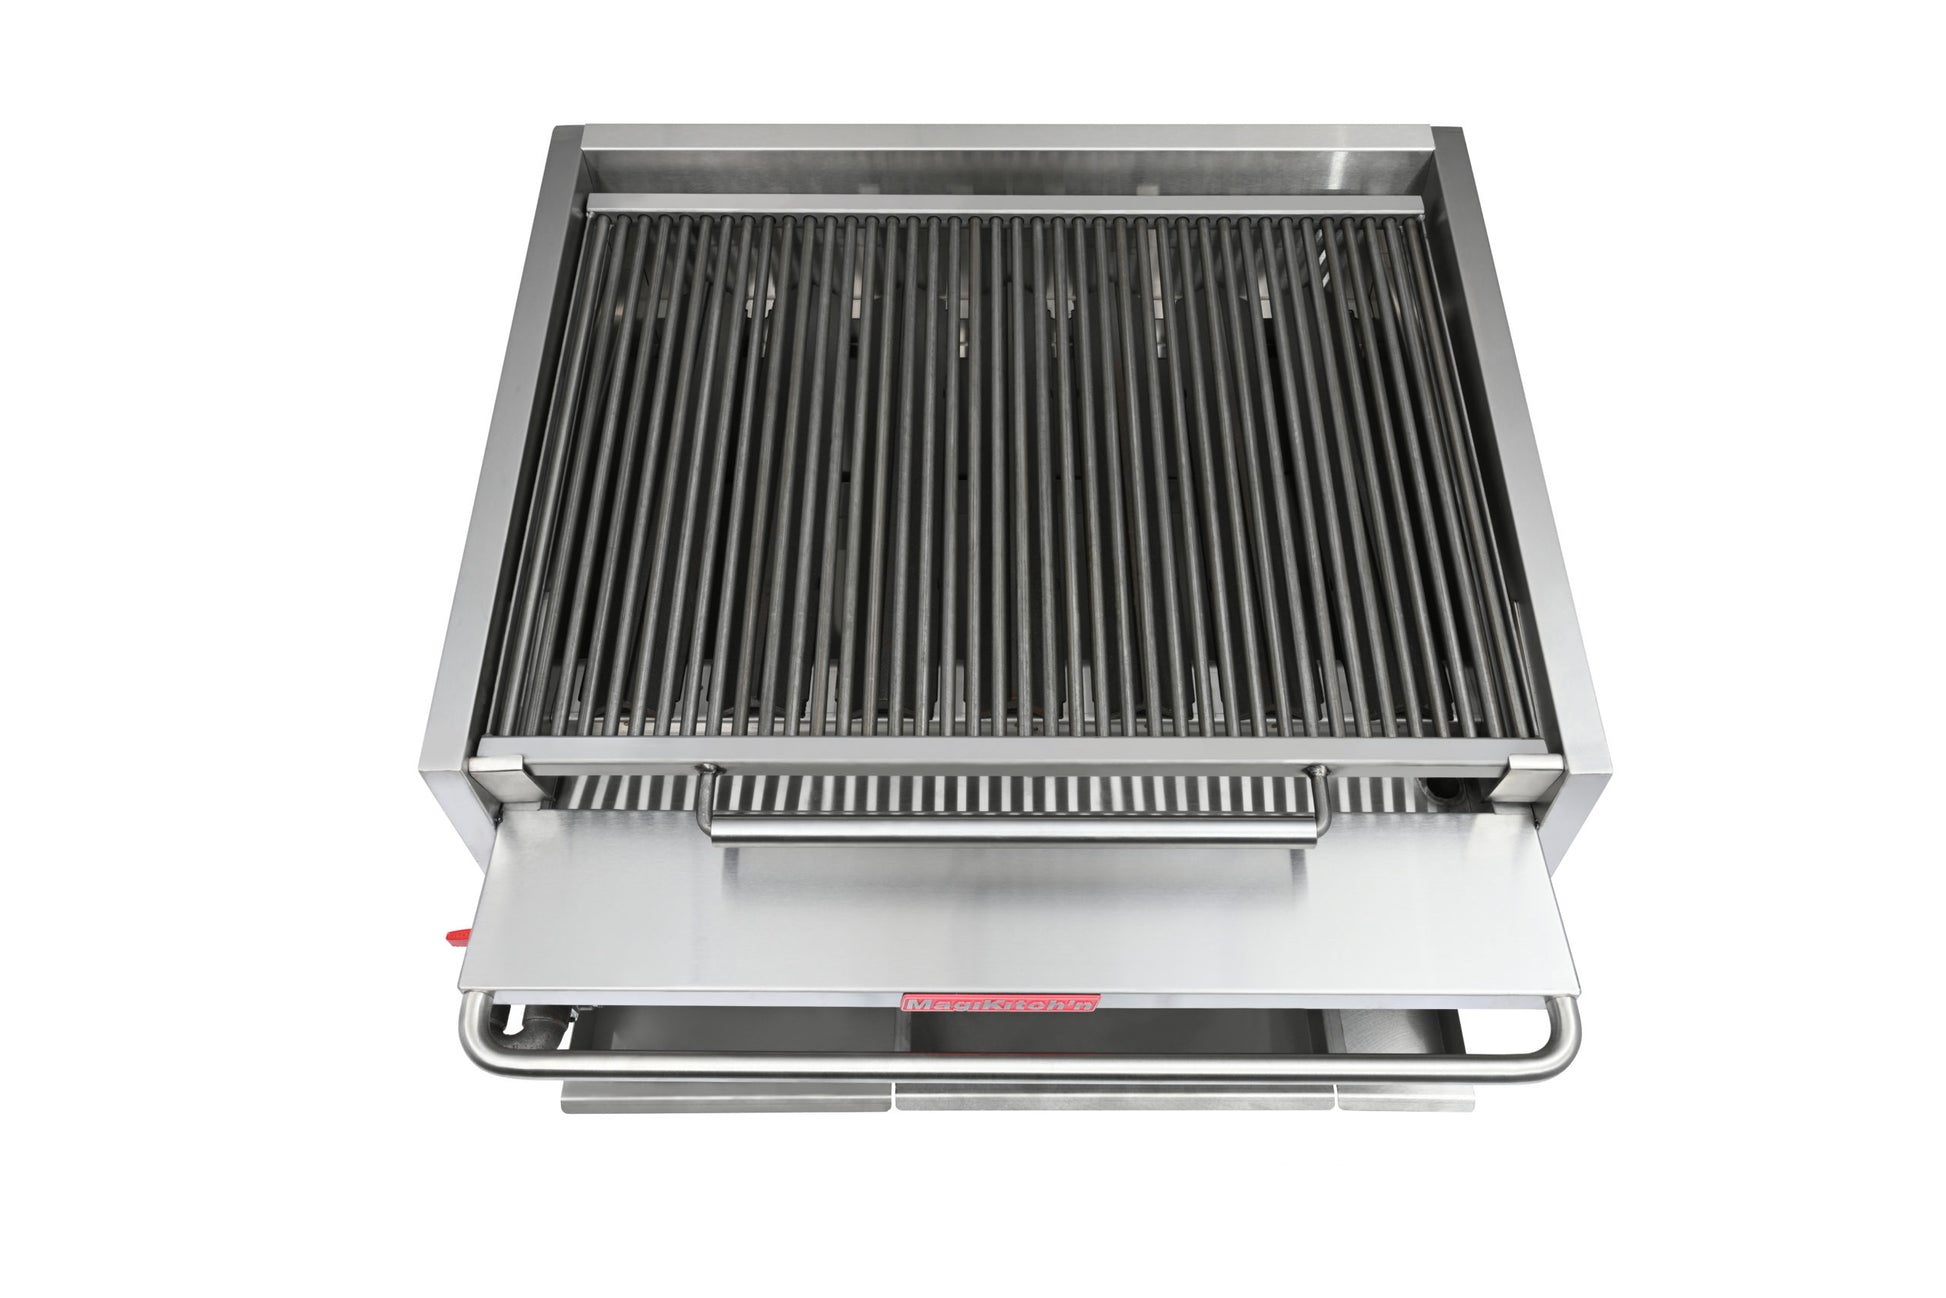 MagiKitch'n Gas Chargrill RMB-660 top view